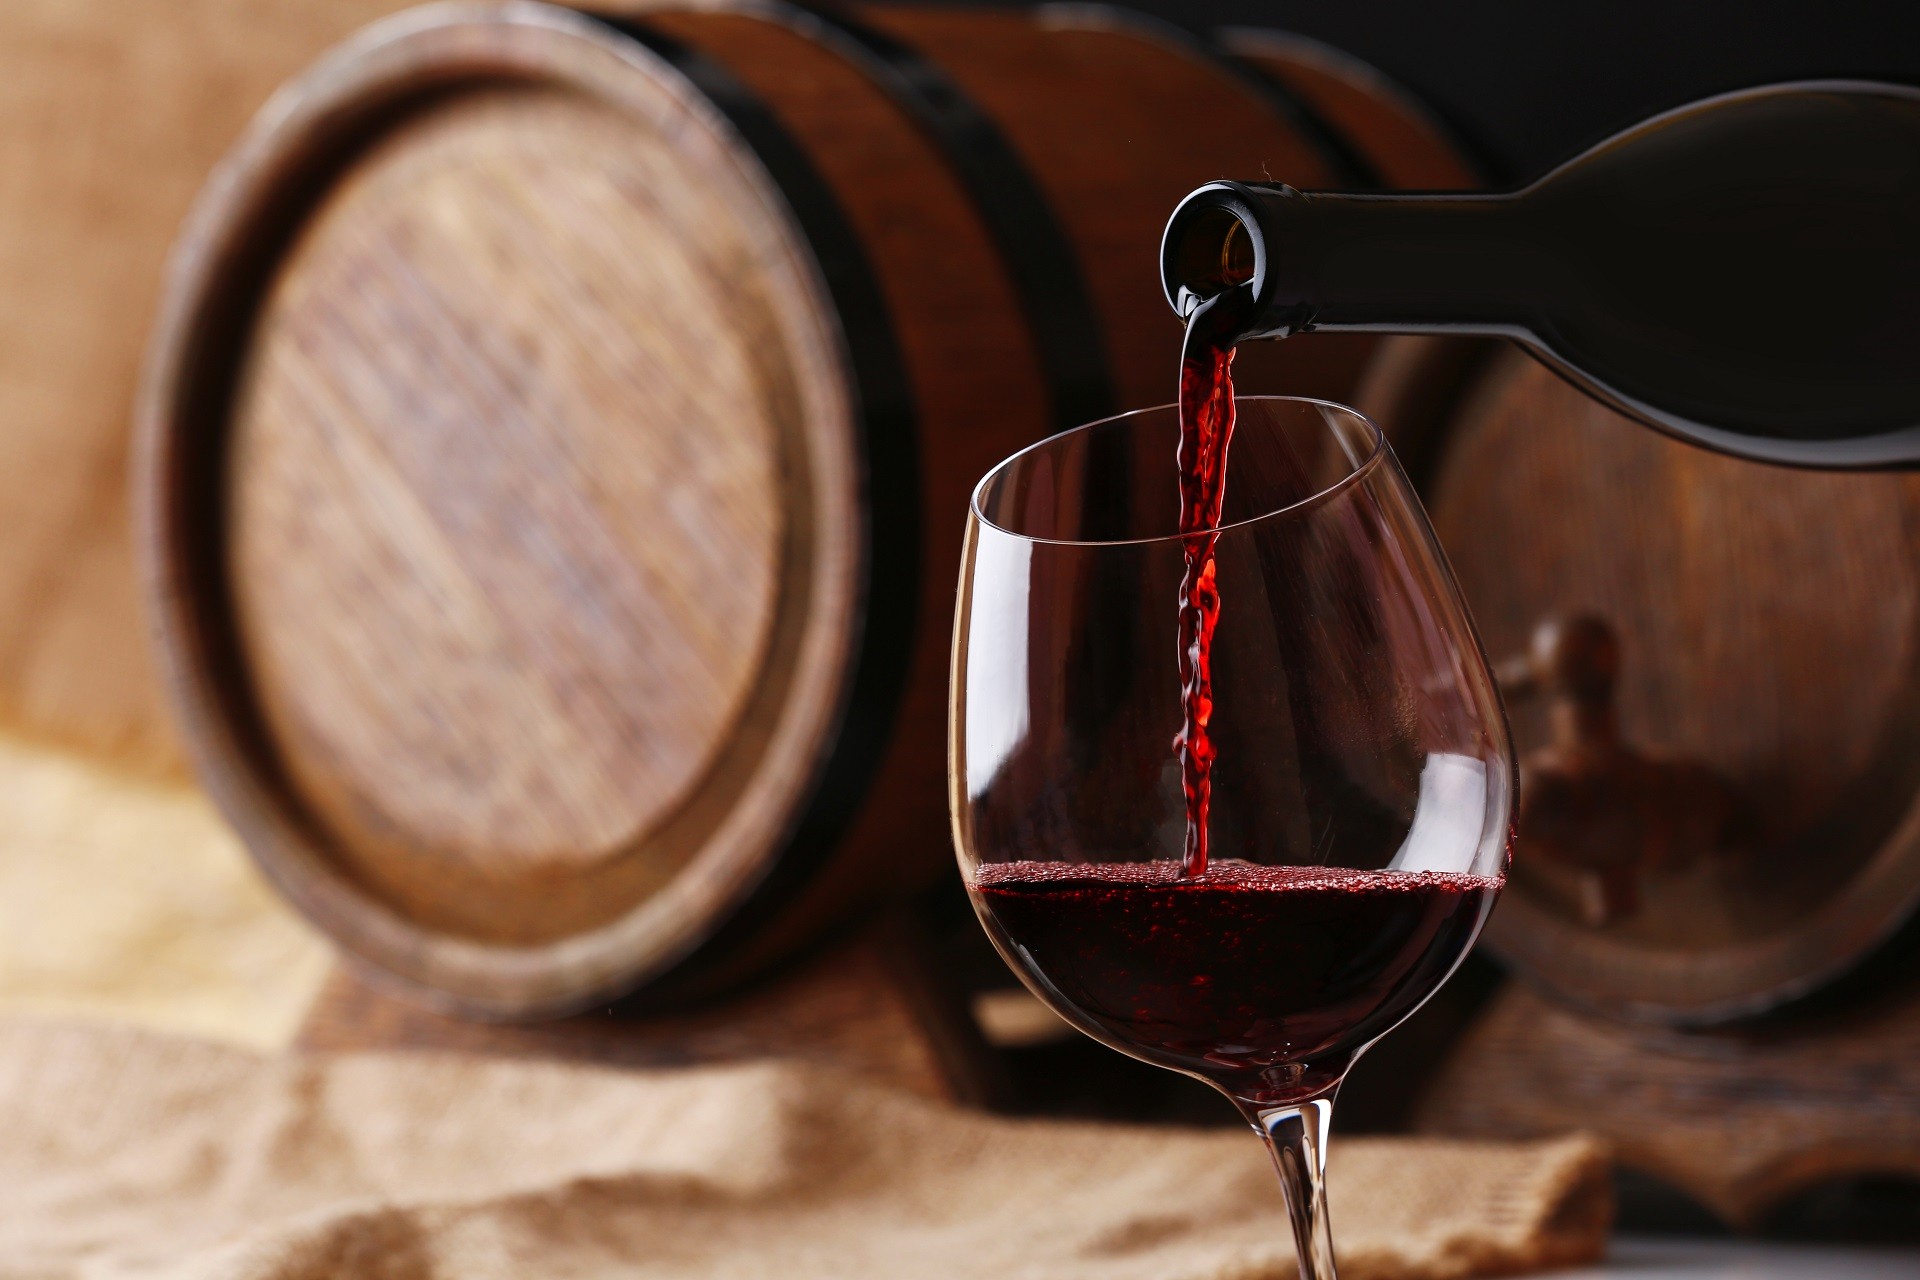 6 Reasons Why a Small Glass of Wine a Day is Good for You